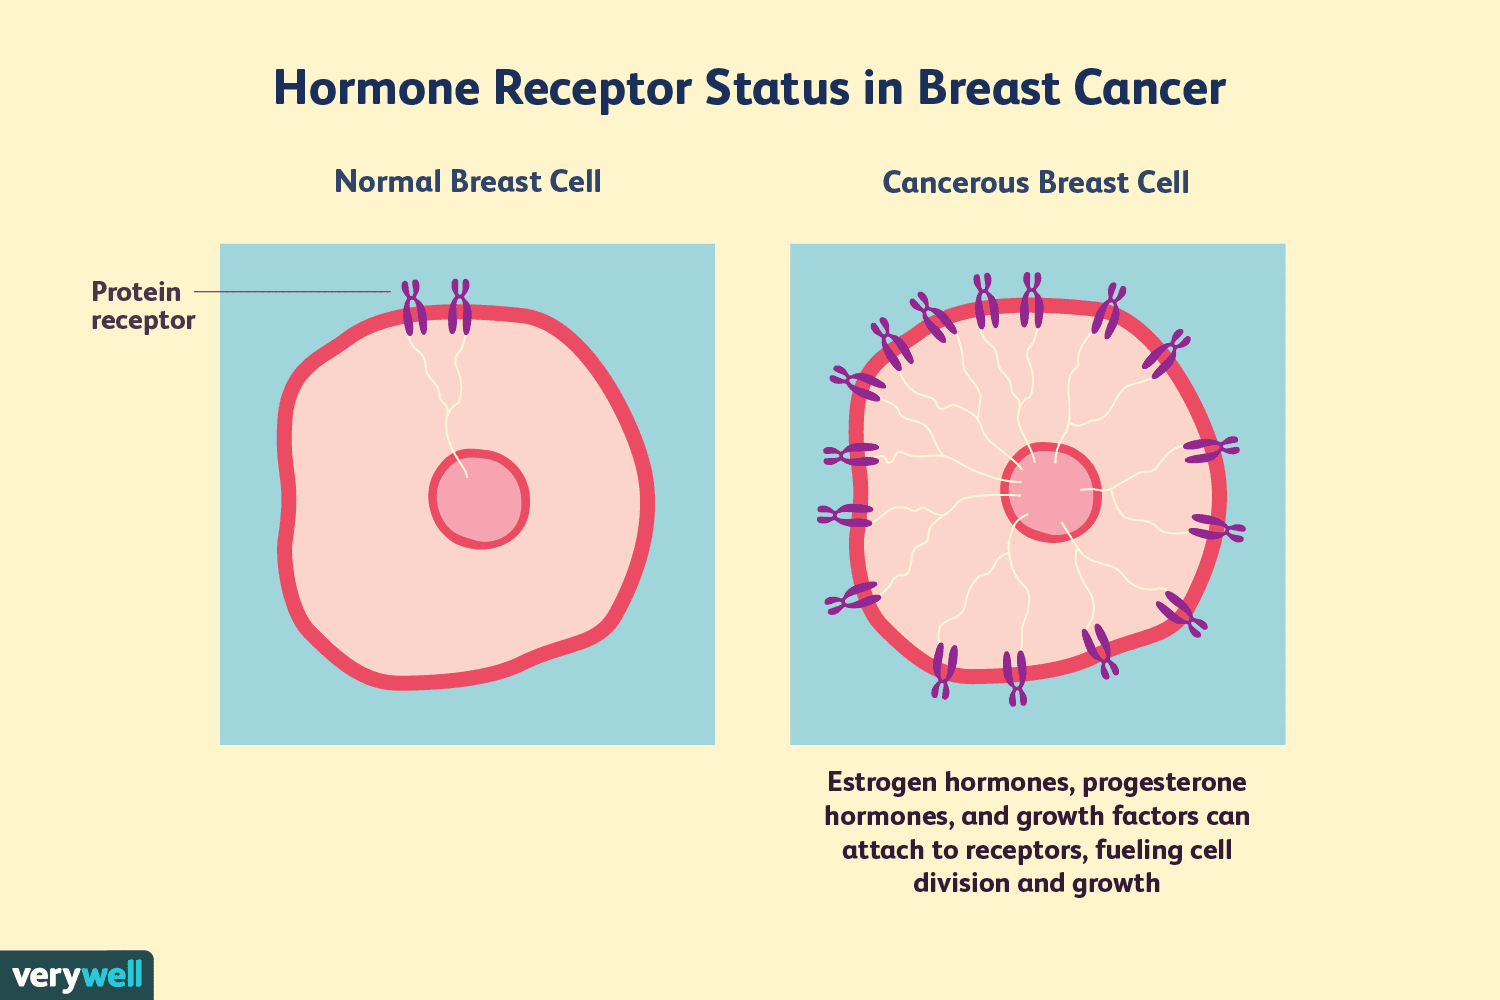 Hormone Receptor Status and Diagnosis in Breast Cancer